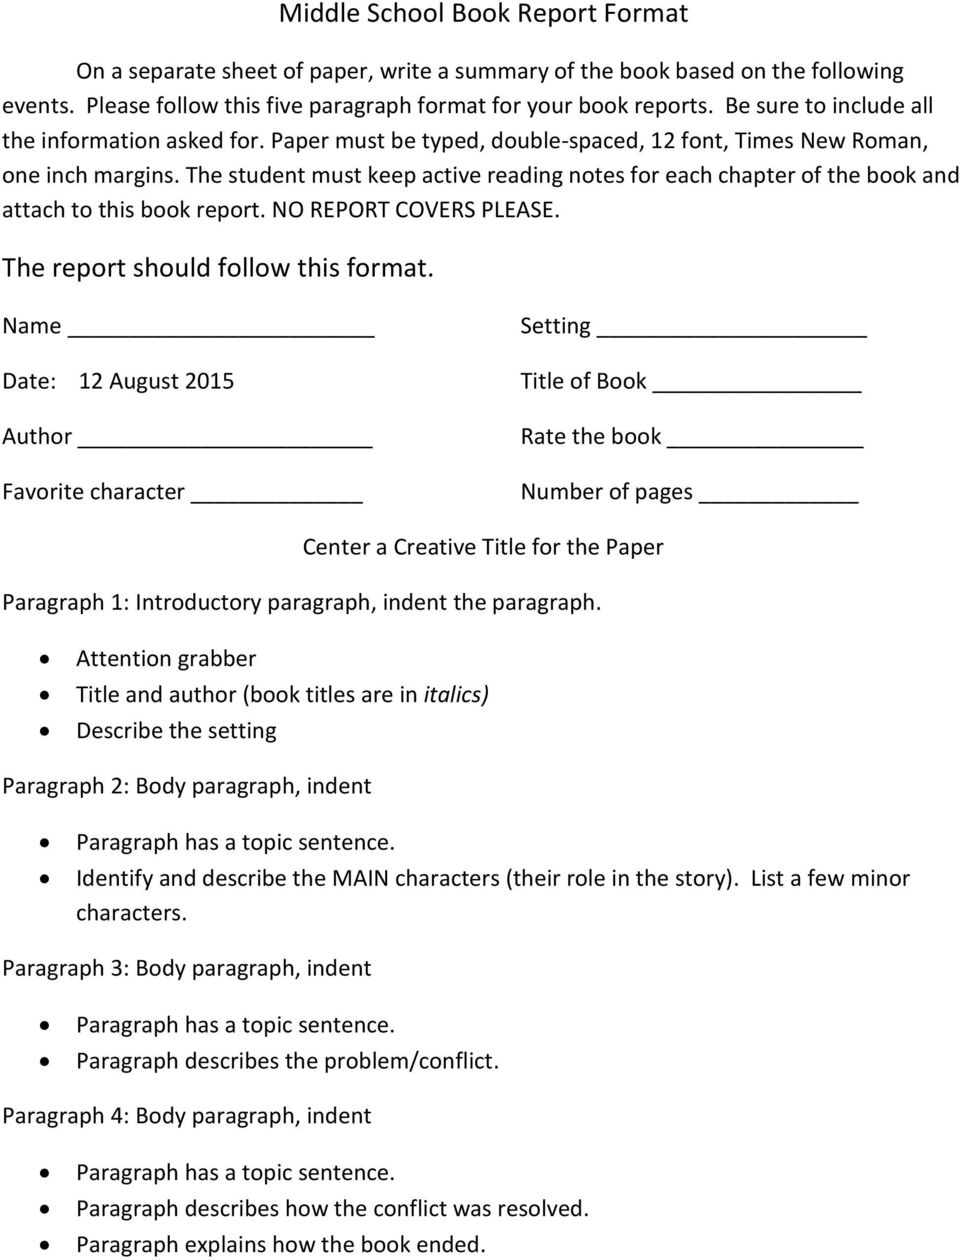 book report for middle school students